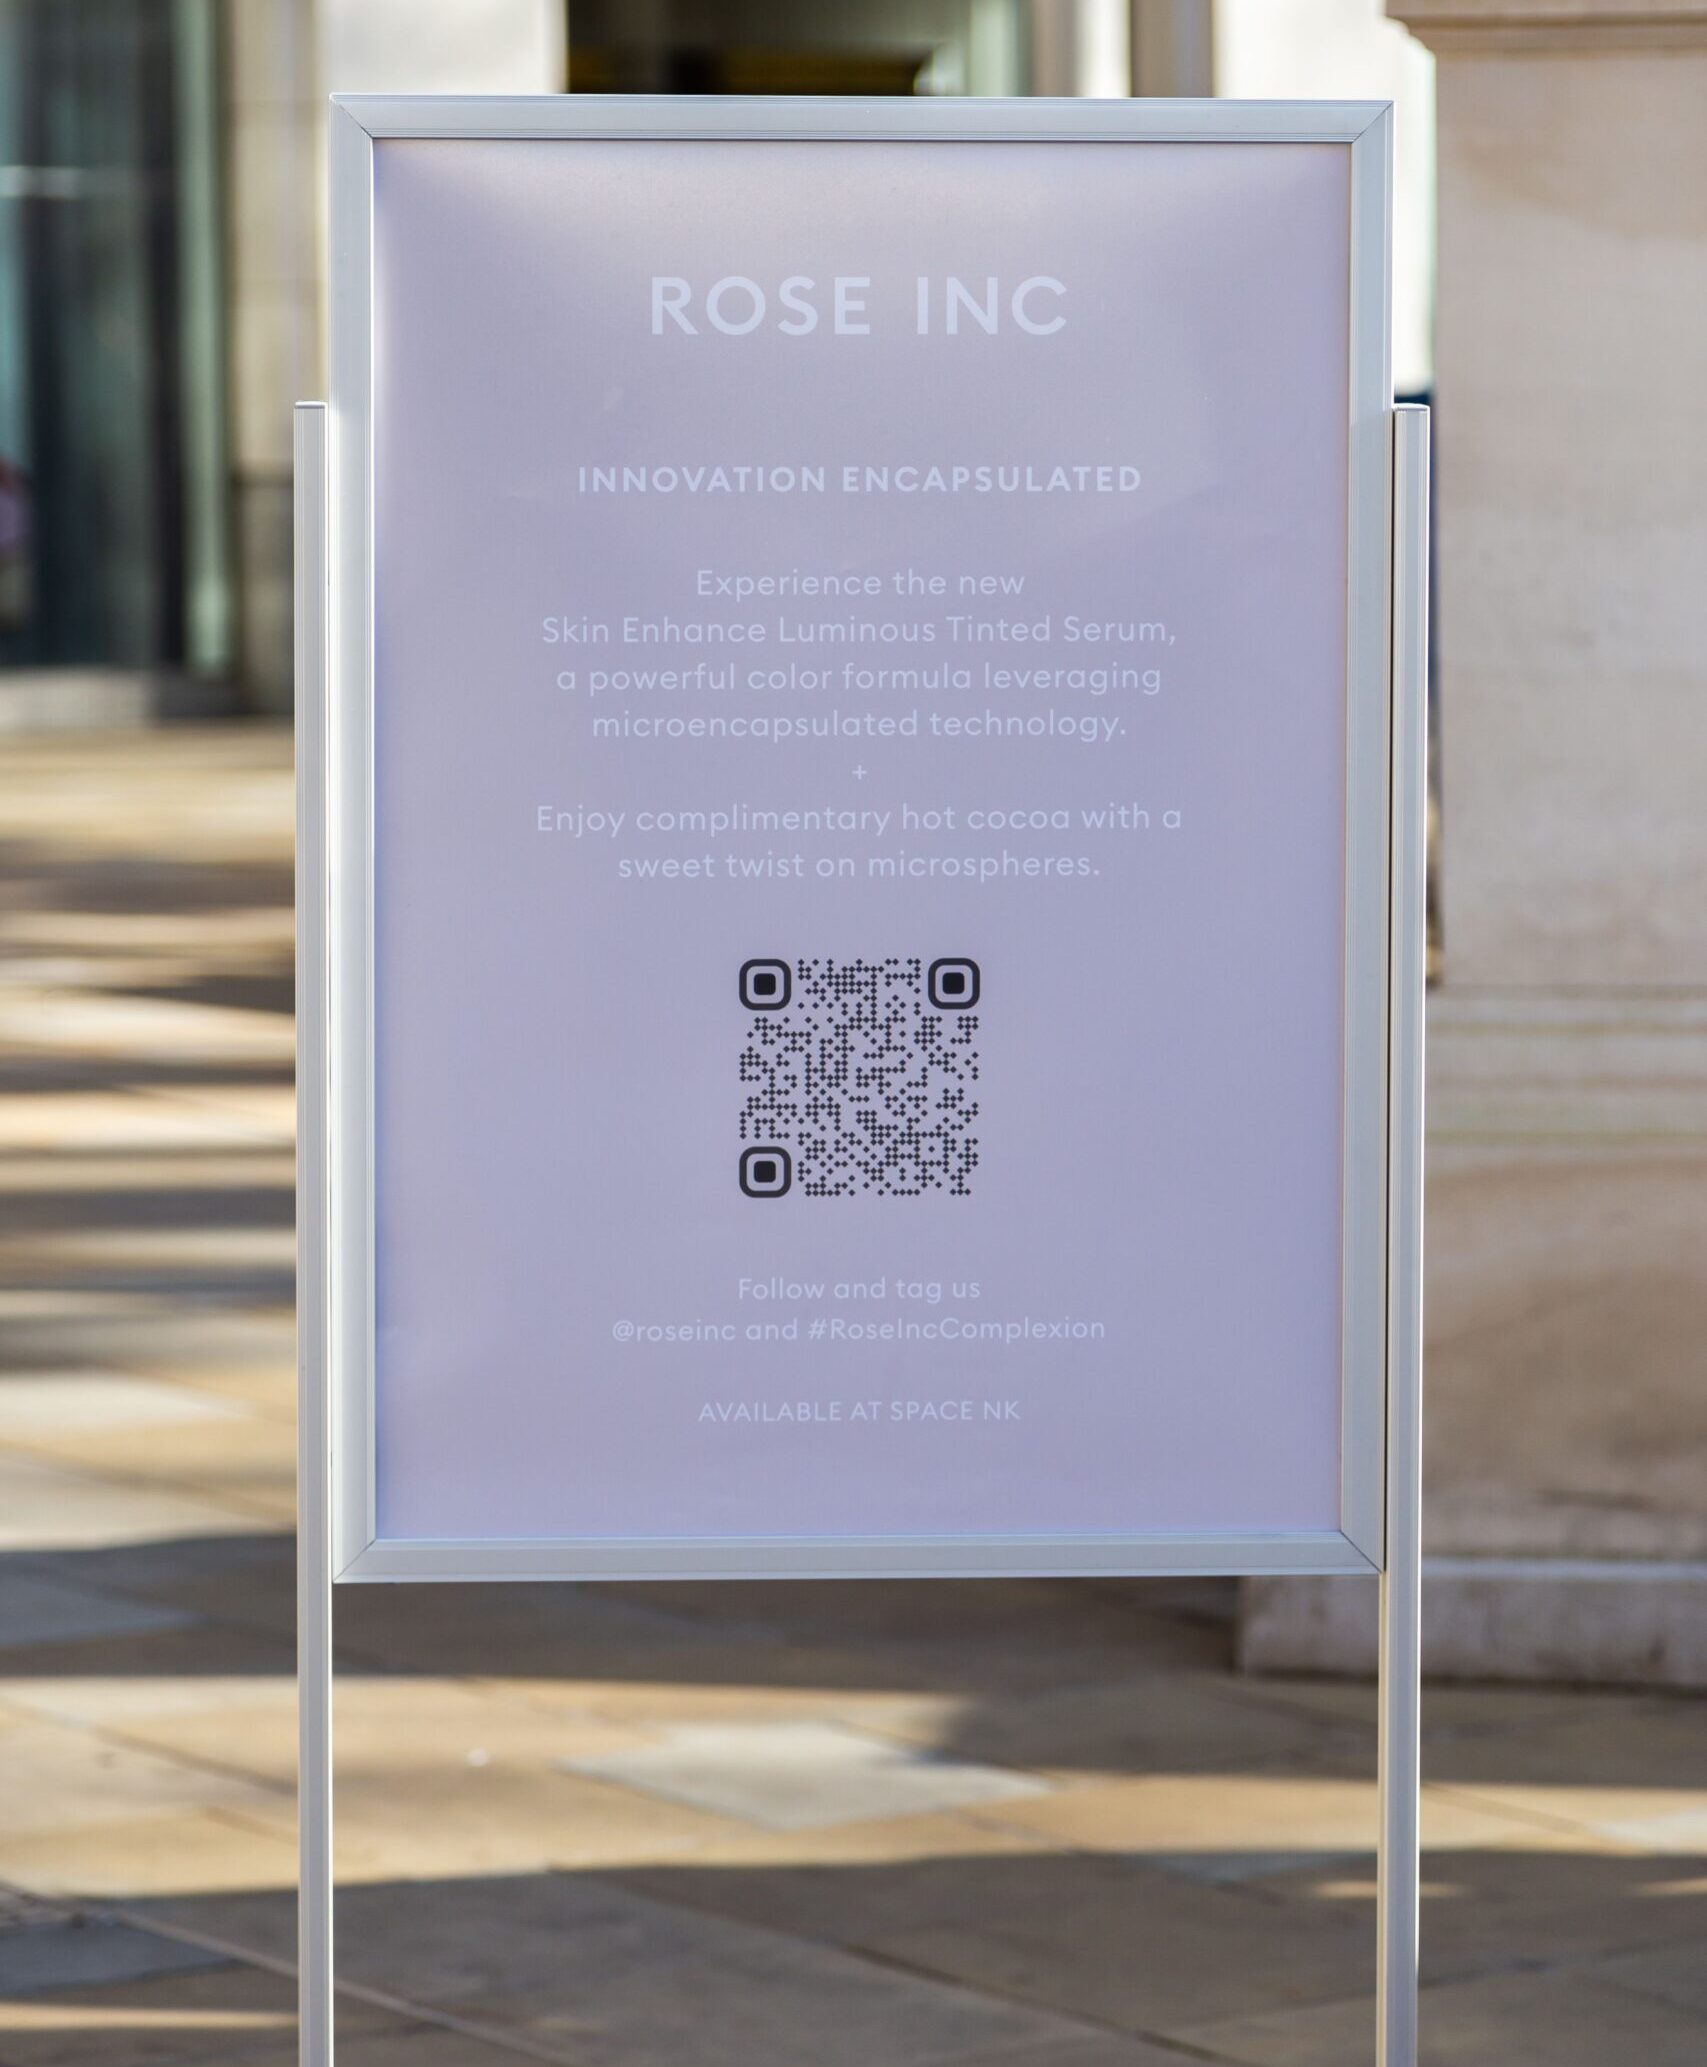 Rose Inc pop-up shop call-to-action